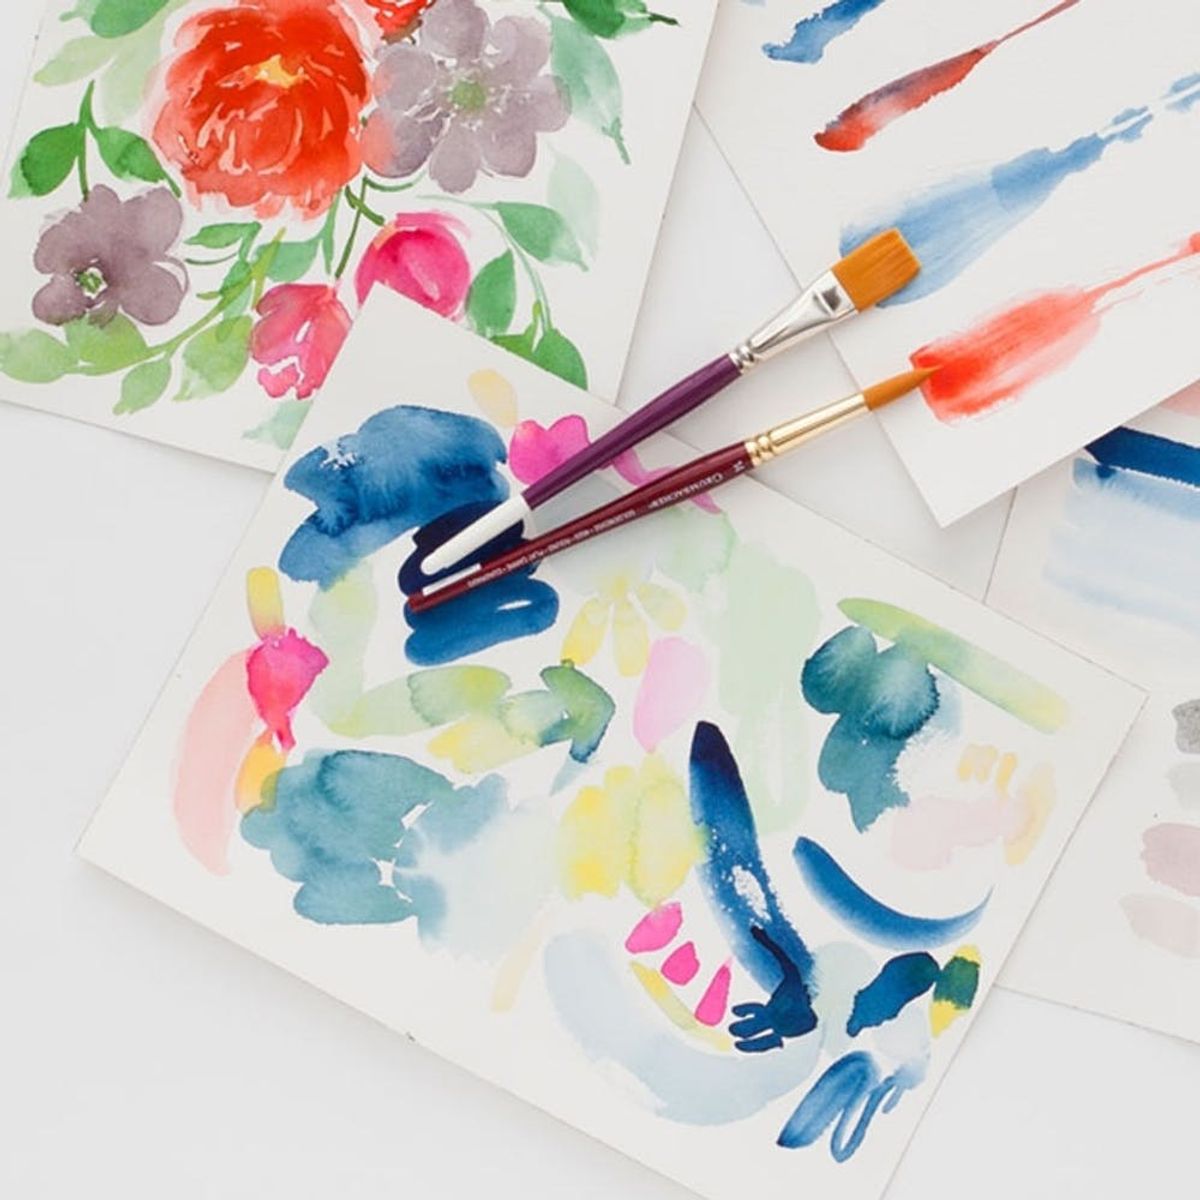 Here’s How You Can Learn to Paint With Watercolors in Just One Hour